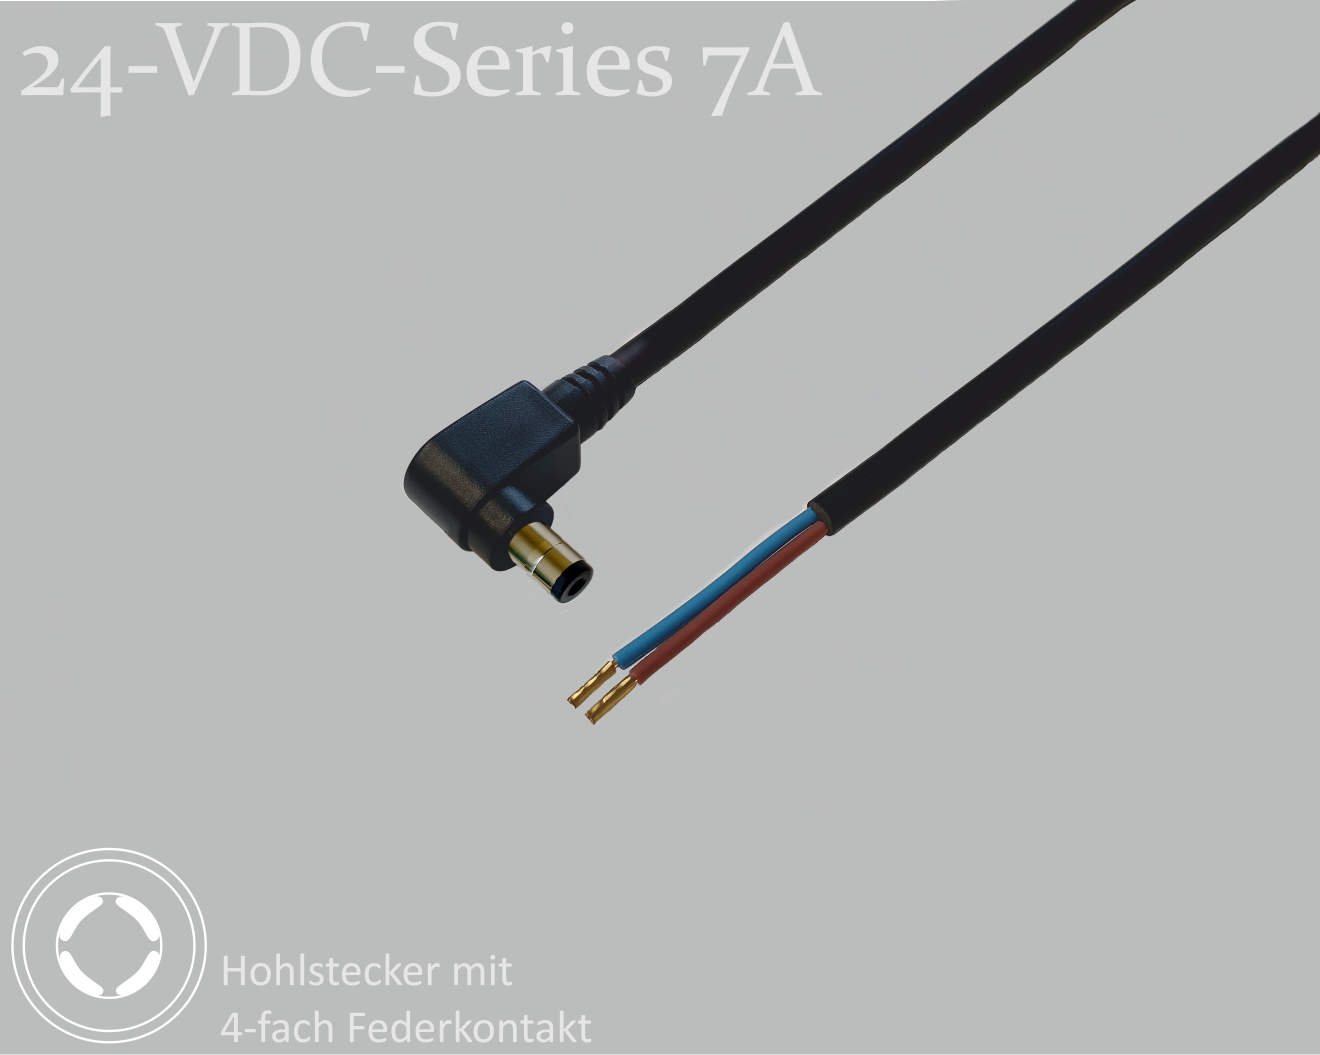 24-VDC-Series 7A, DC connection cable, DC right-angle plug with 4-spring contact 2.1x5.5x9.5mm, round cable 2x0.50mm², black, wire end sleeves, 0.75m